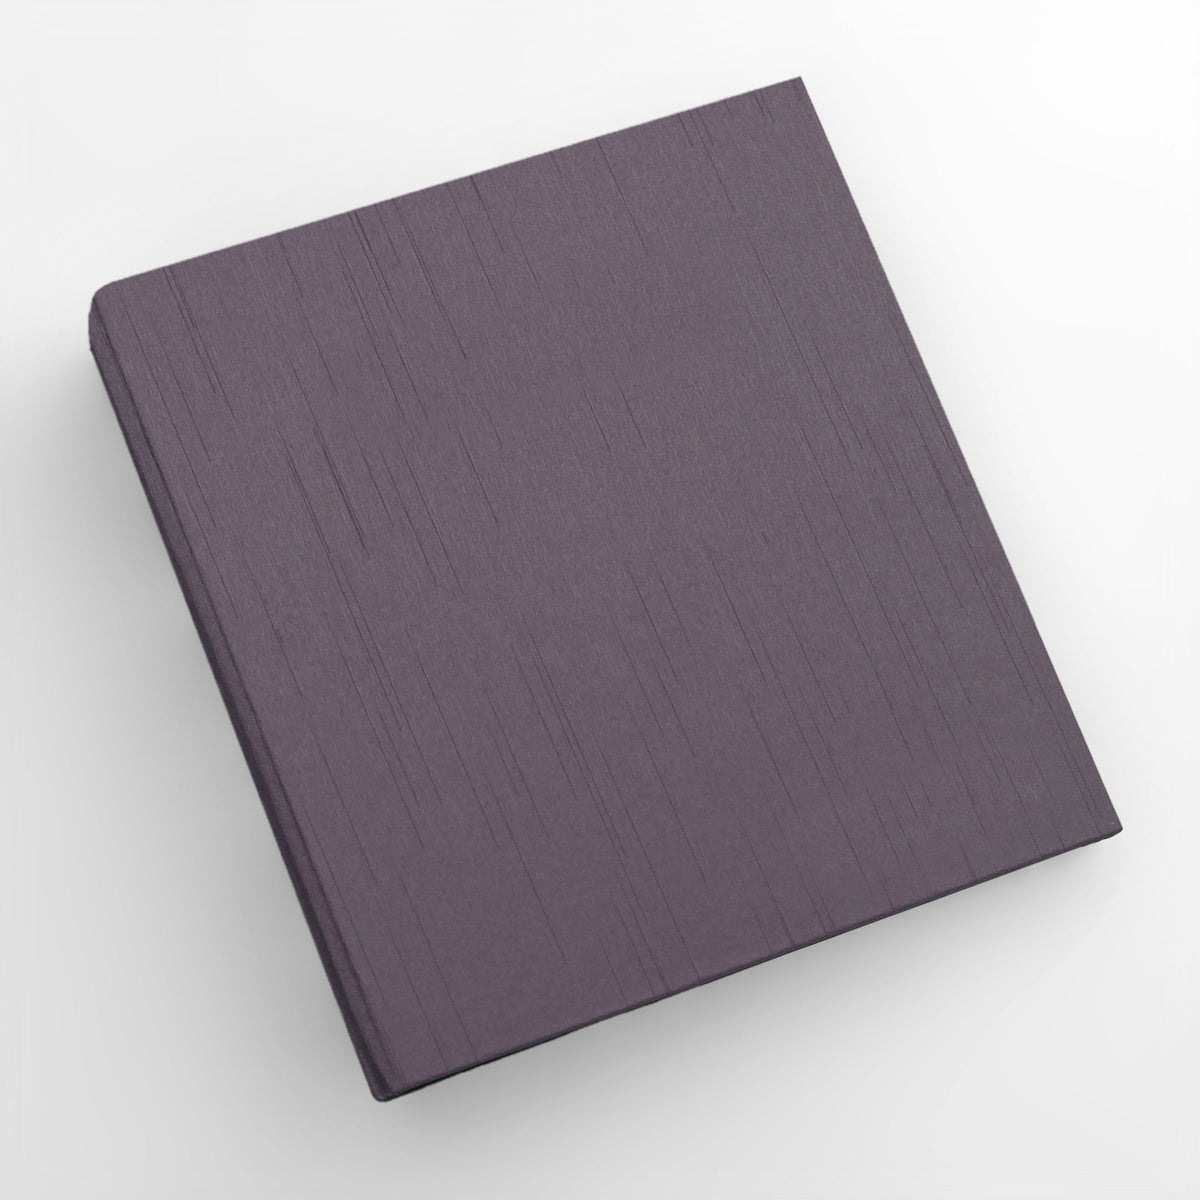 Large Photo Binder (for 4x6 photos) with Amethyst Silk Cover